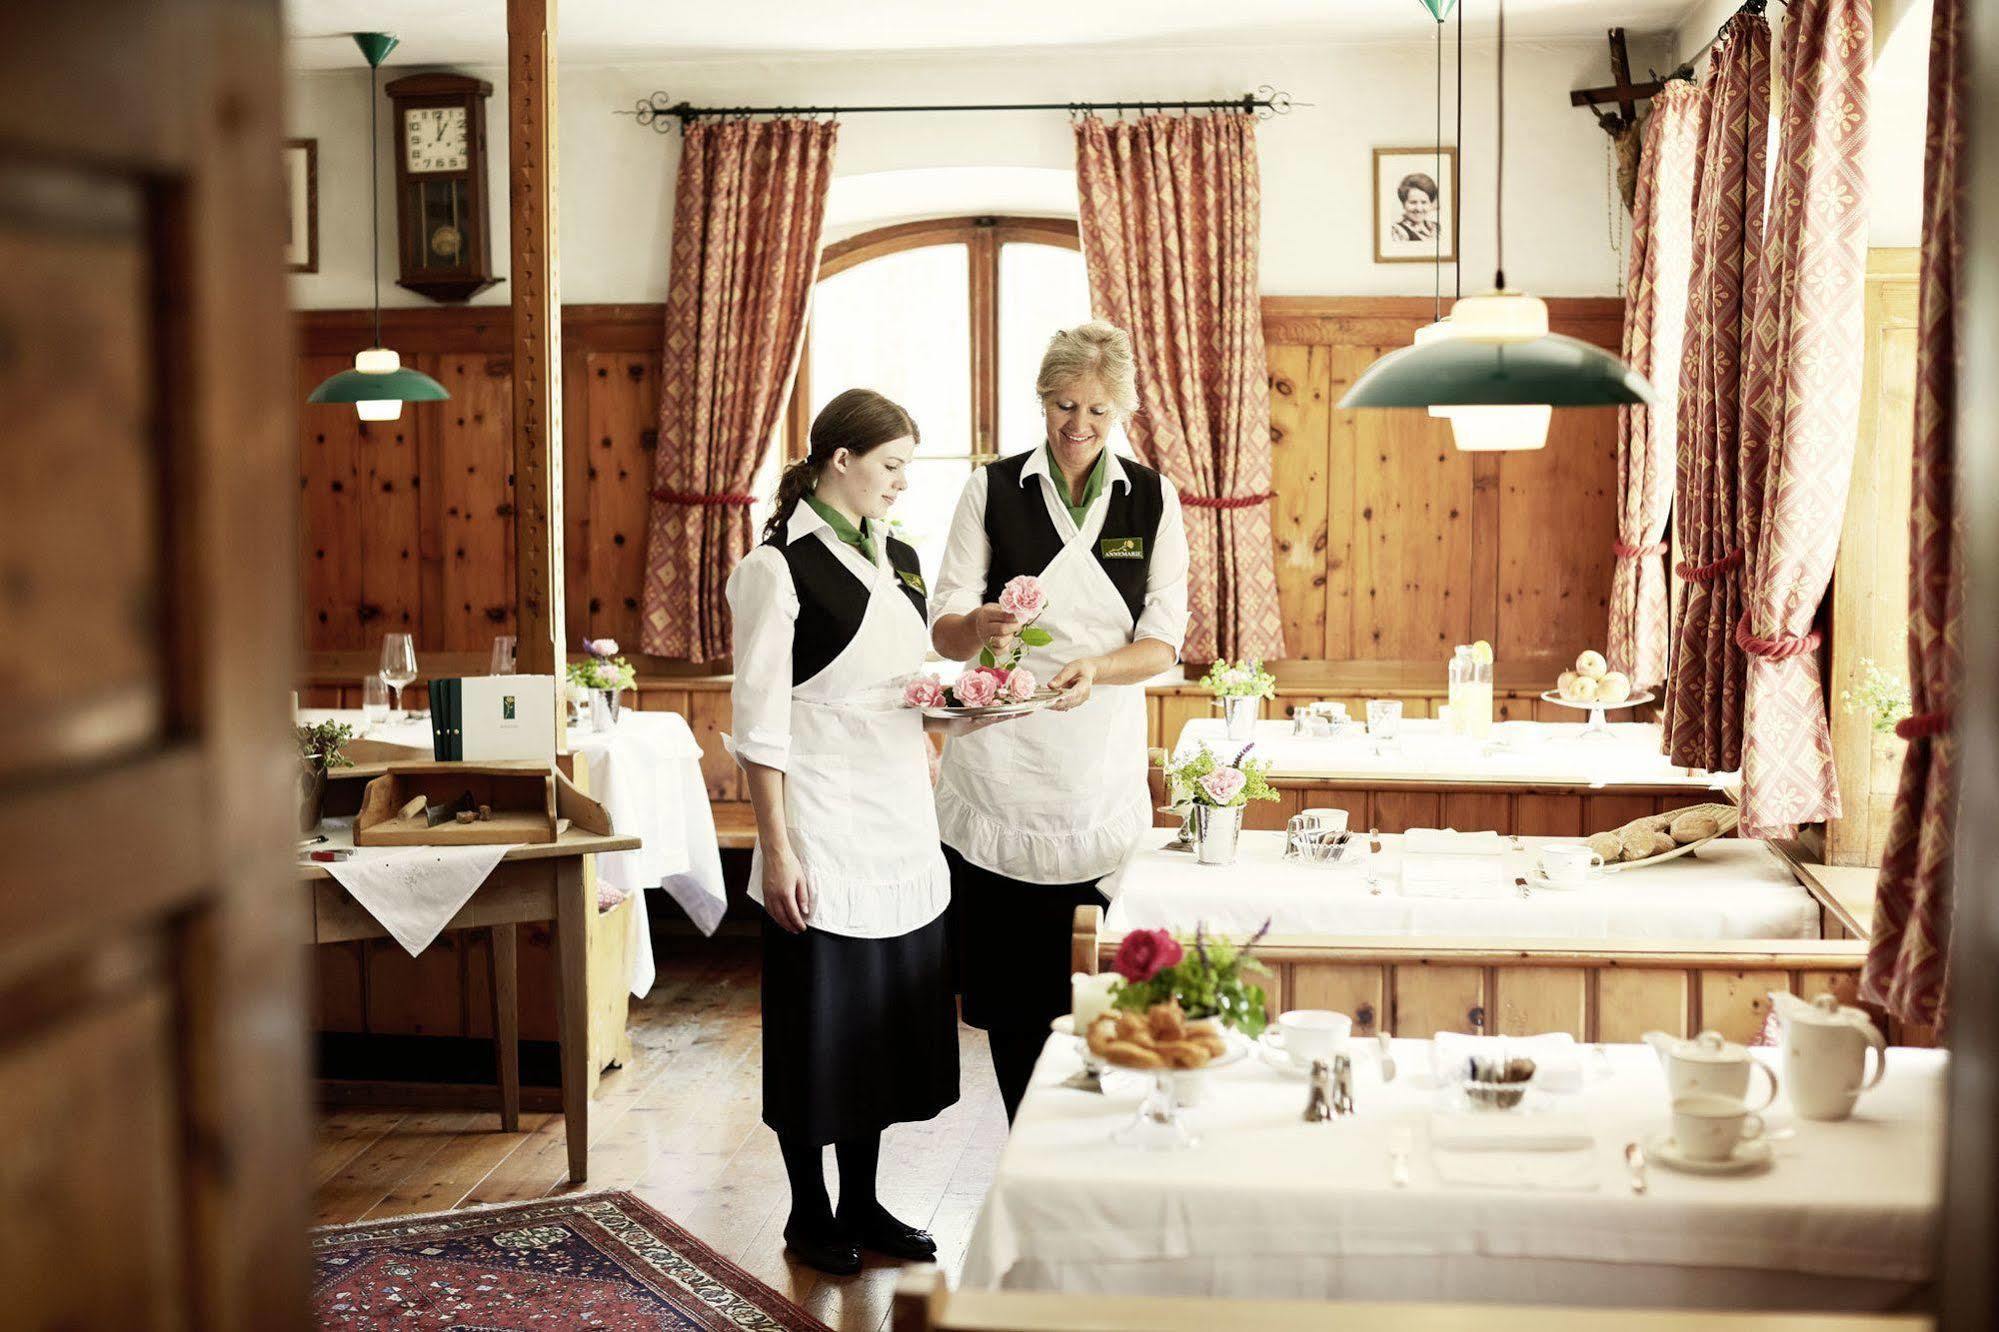 Goldene Rose Karthaus A Member Of Small Luxury Hotels Of The World Senales/Schnals 외부 사진